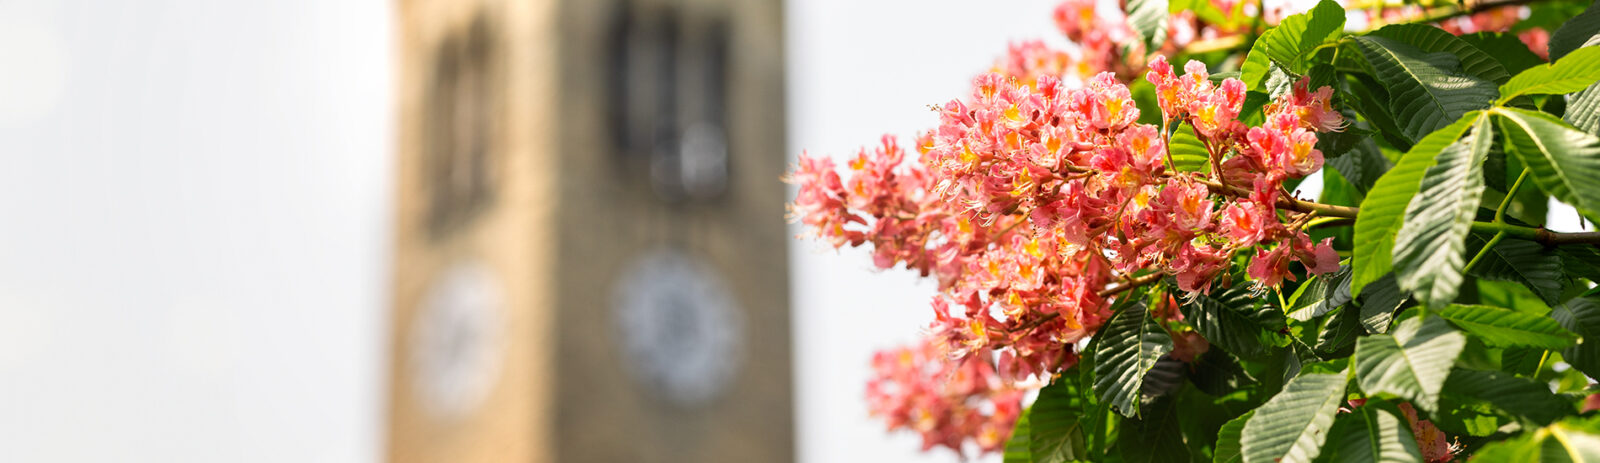 Coral flowers with the McGraw Tower in the background.